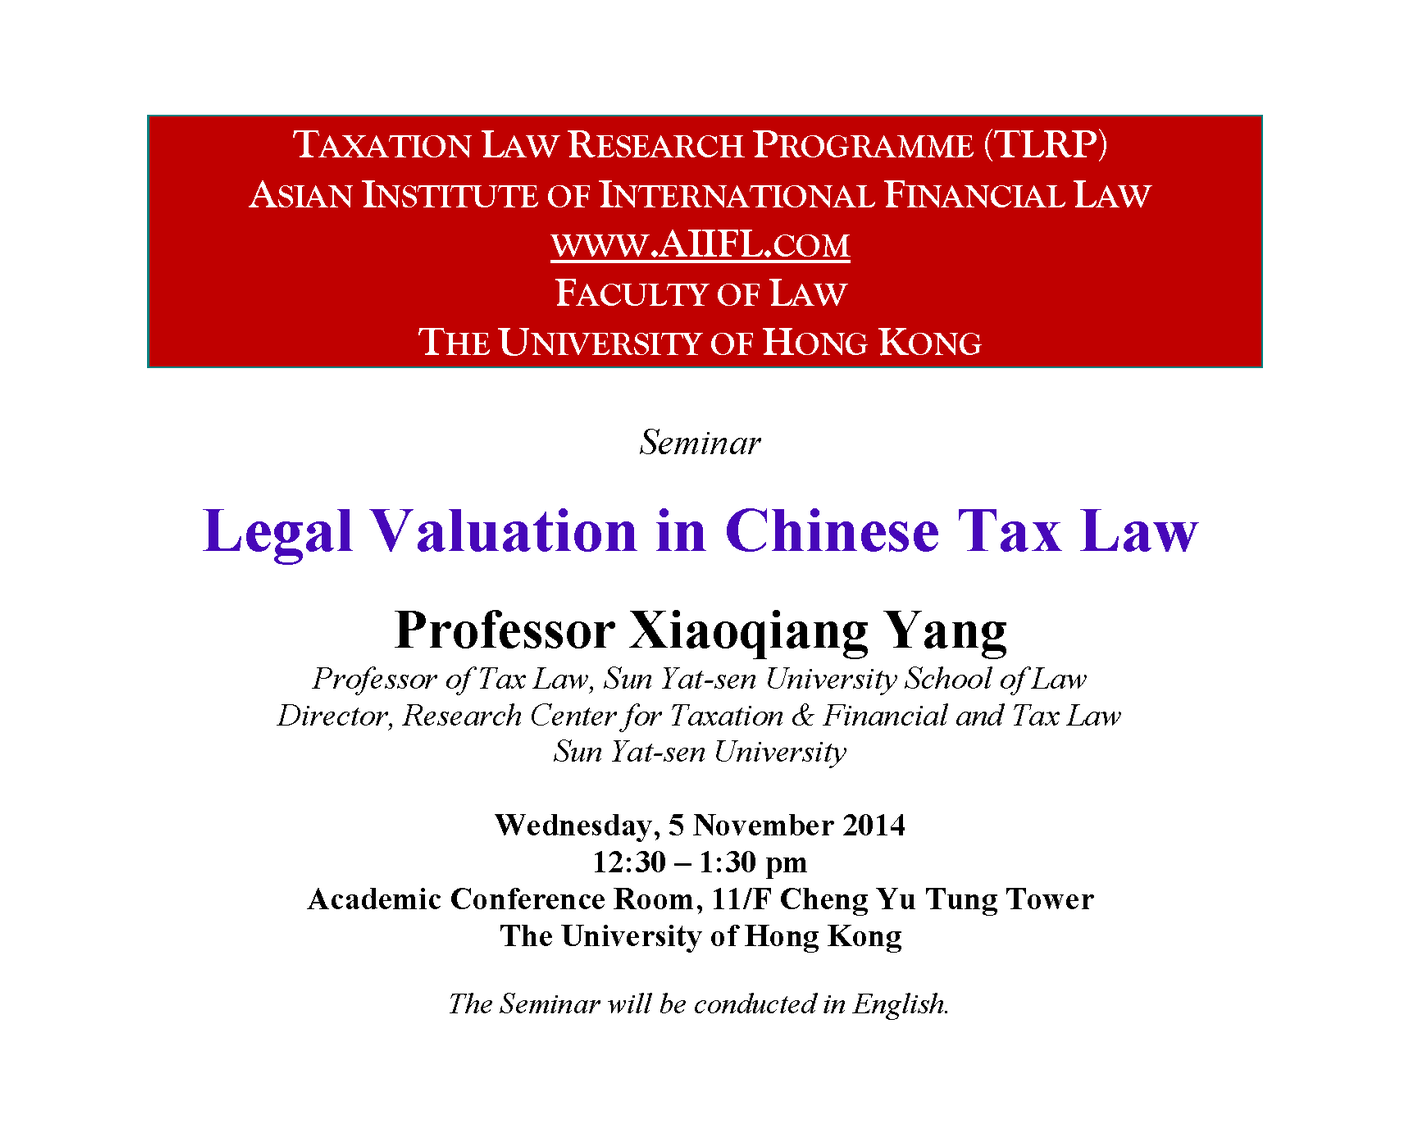 Legal Valuation in Chinese Tax Law